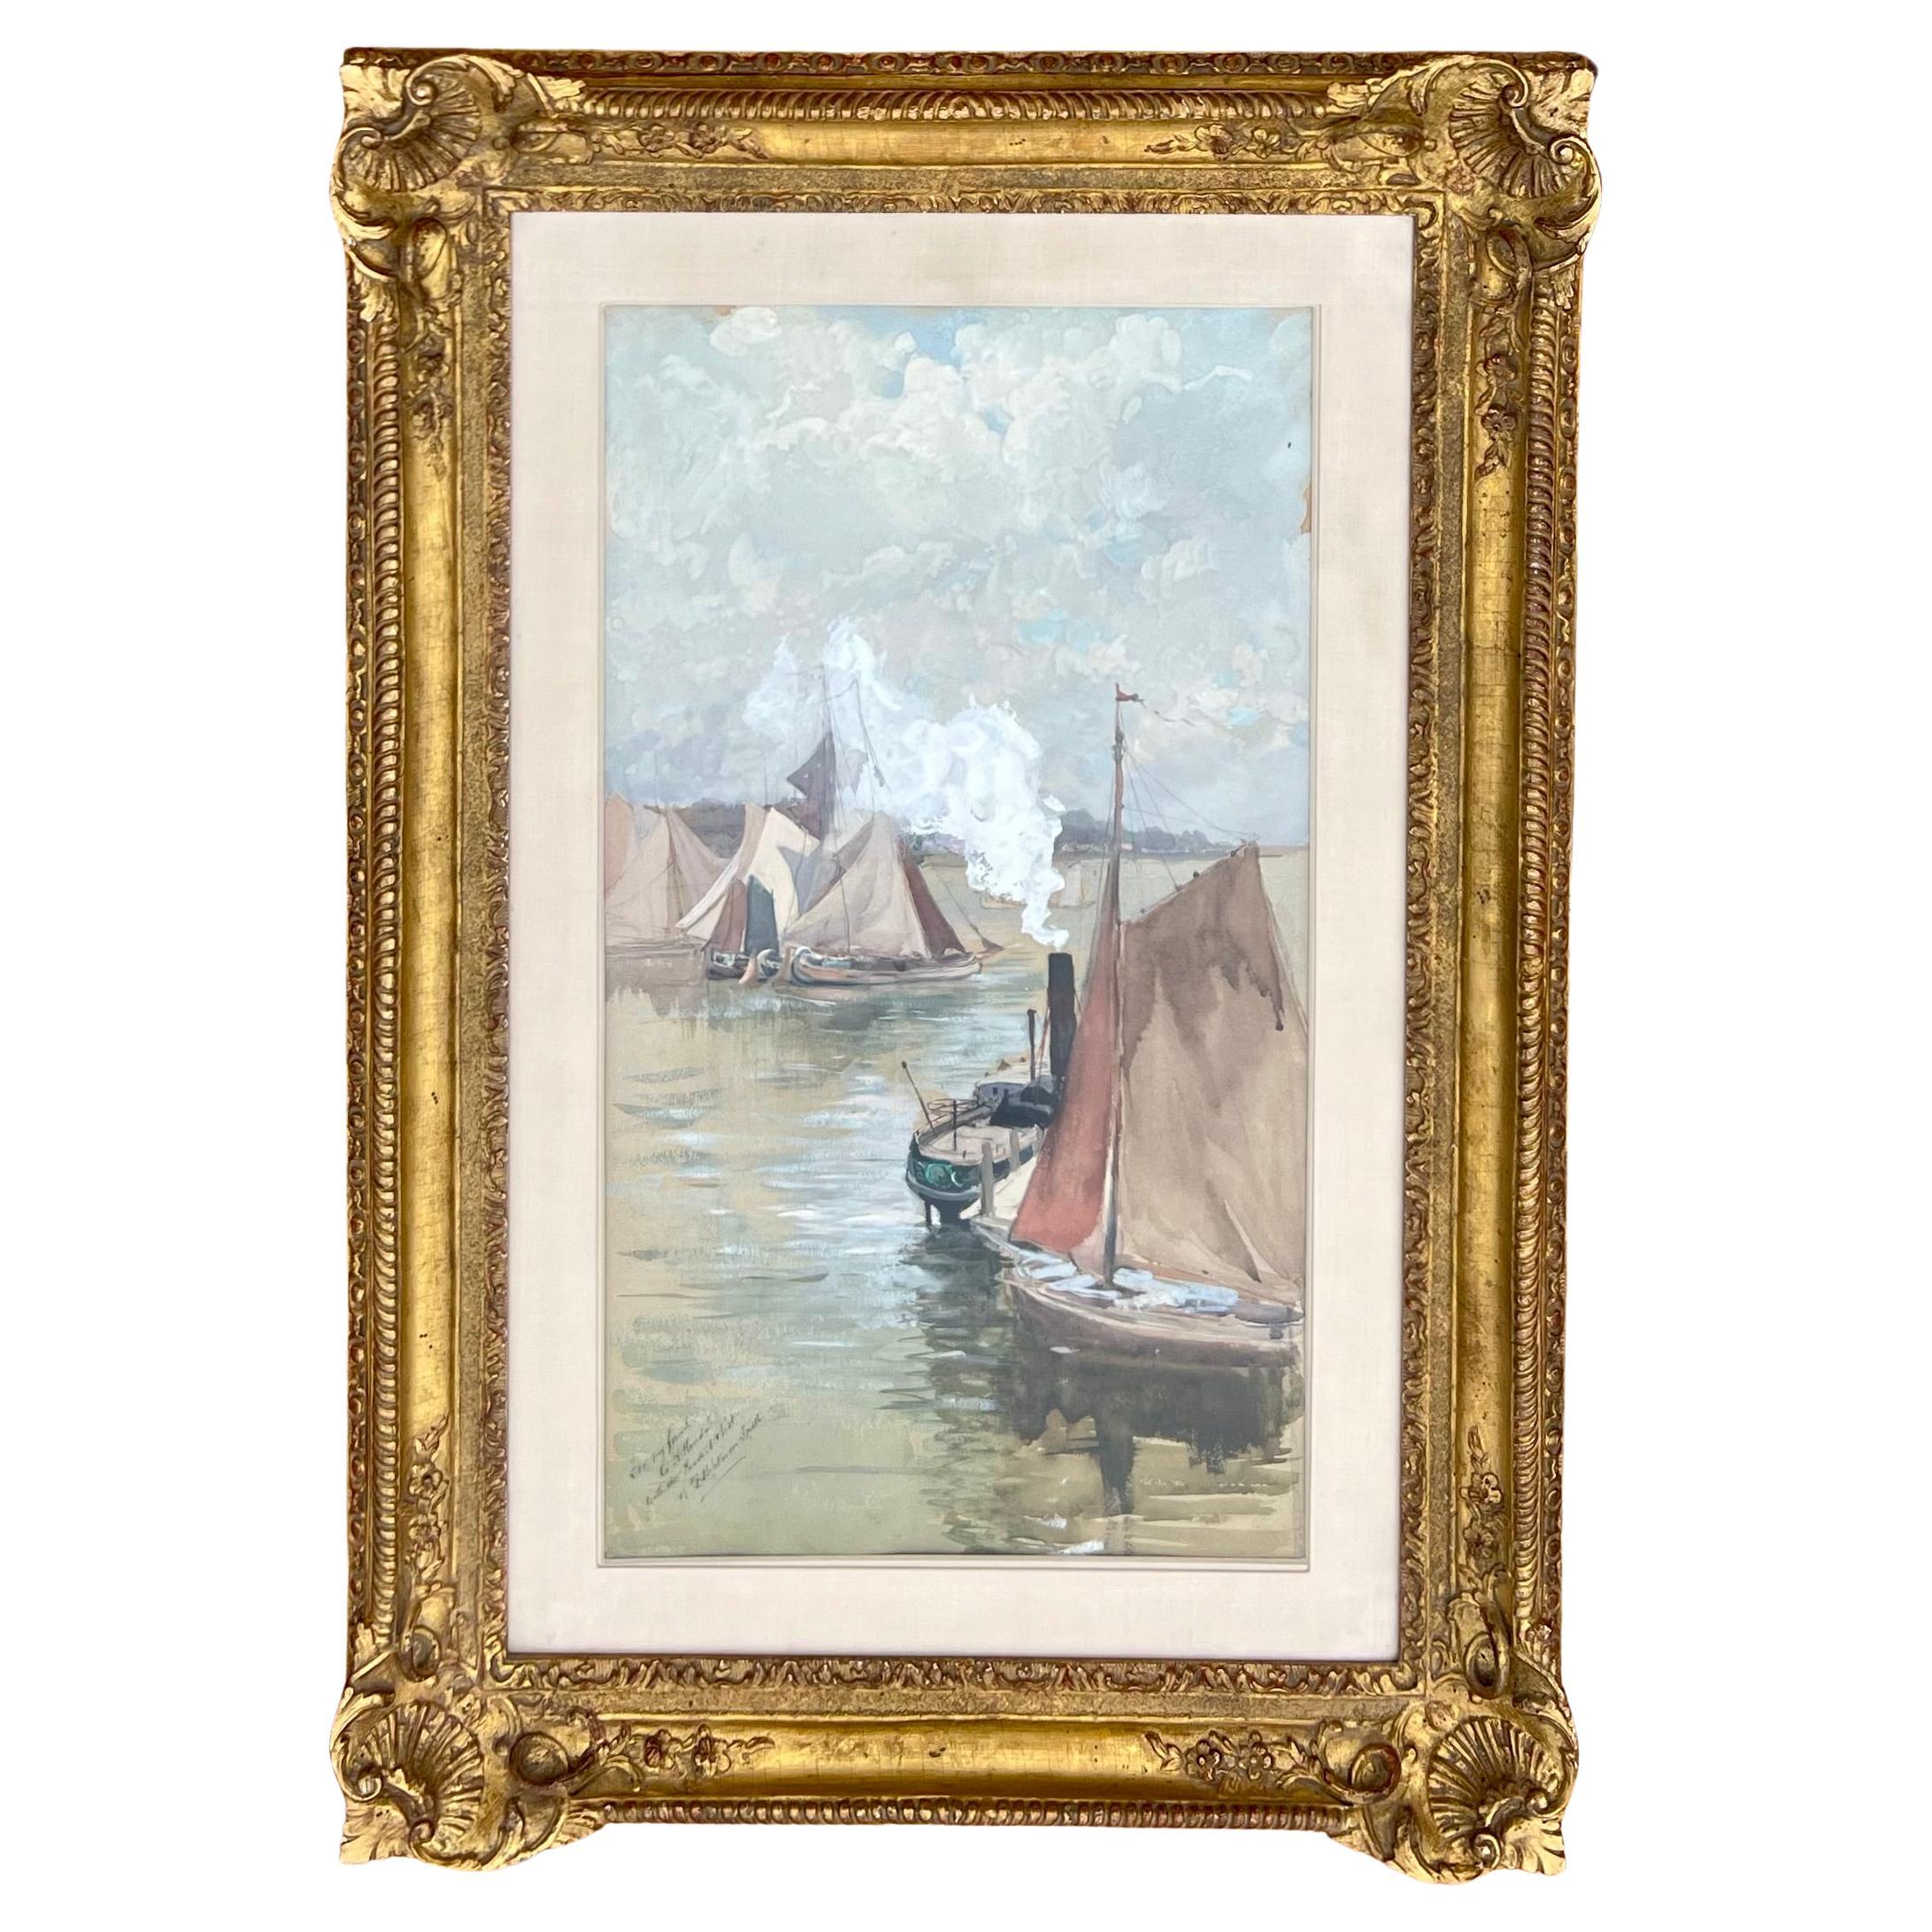 "The Peaceful Harbor" by Frances Hopkinson Smith For Sale